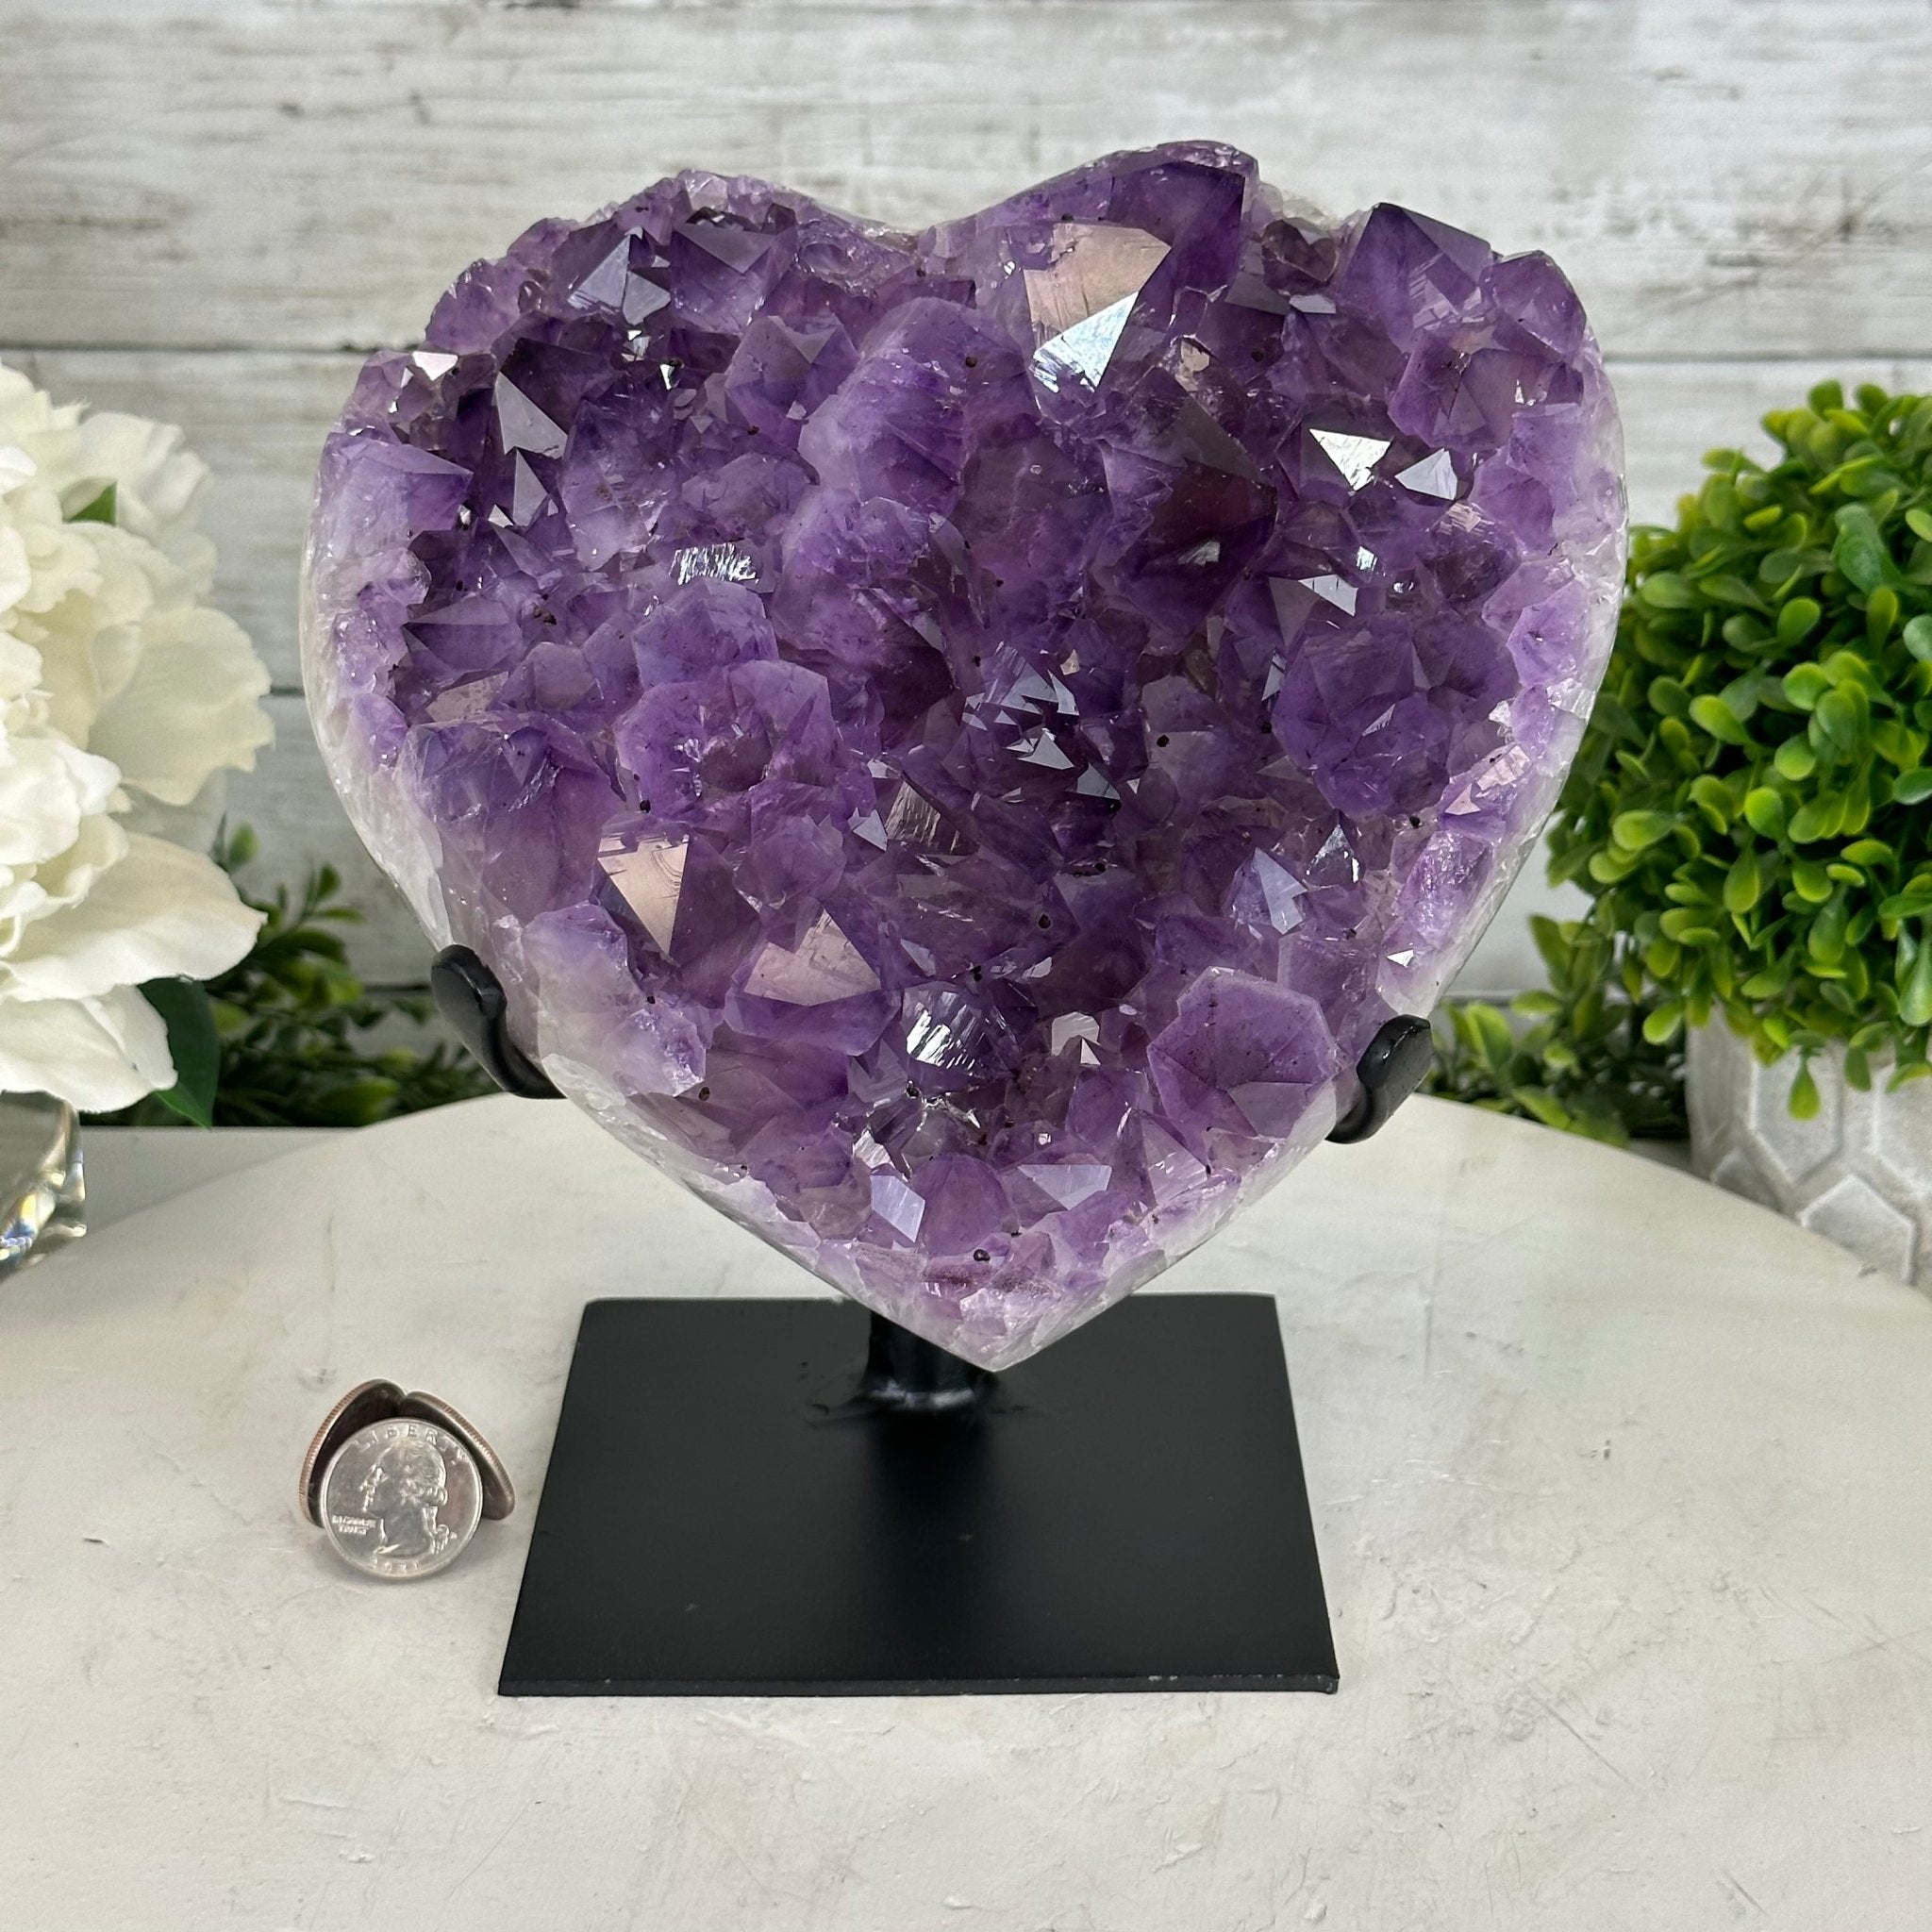 Extra Quality Amethyst Heart Geode w/ metal stand, 8.7 lbs & 8" Tall #5463-0293 - Brazil GemsBrazil GemsExtra Quality Amethyst Heart Geode w/ metal stand, 8.7 lbs & 8" Tall #5463-0293Hearts5463-0293